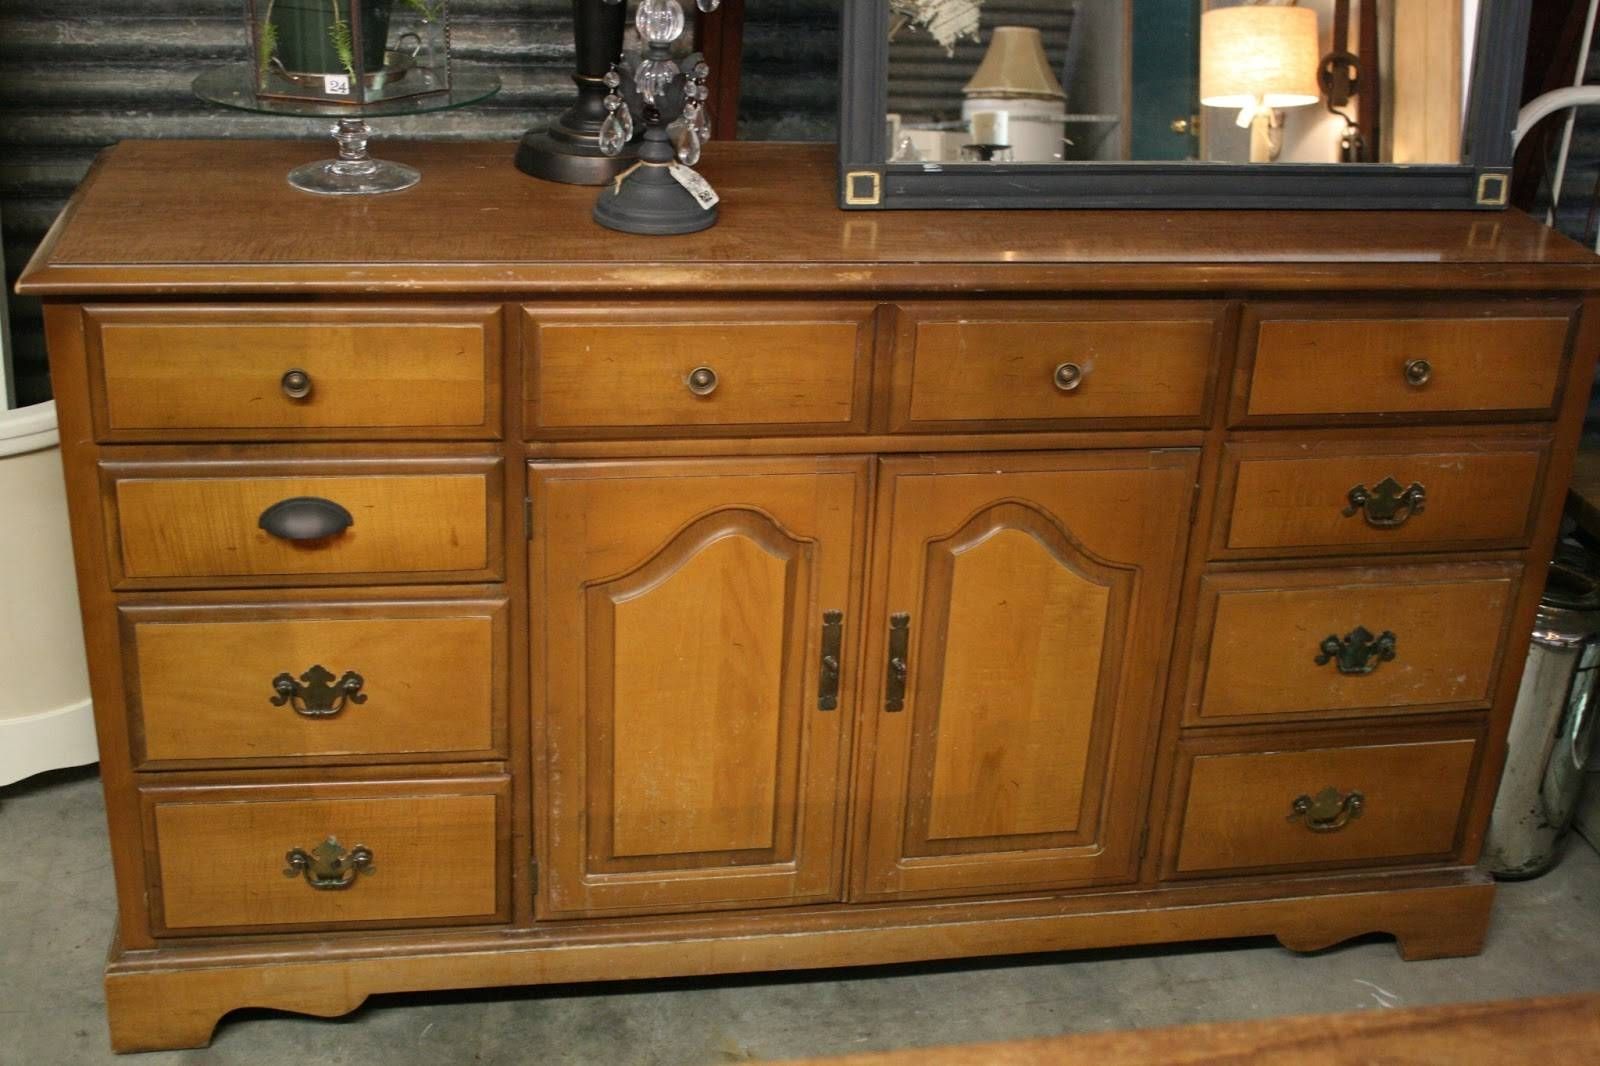 Reloved Rubbish: Arles Chalk Paint Buffet In Most Recently Released Chalk Painted Sideboards (View 2 of 15)